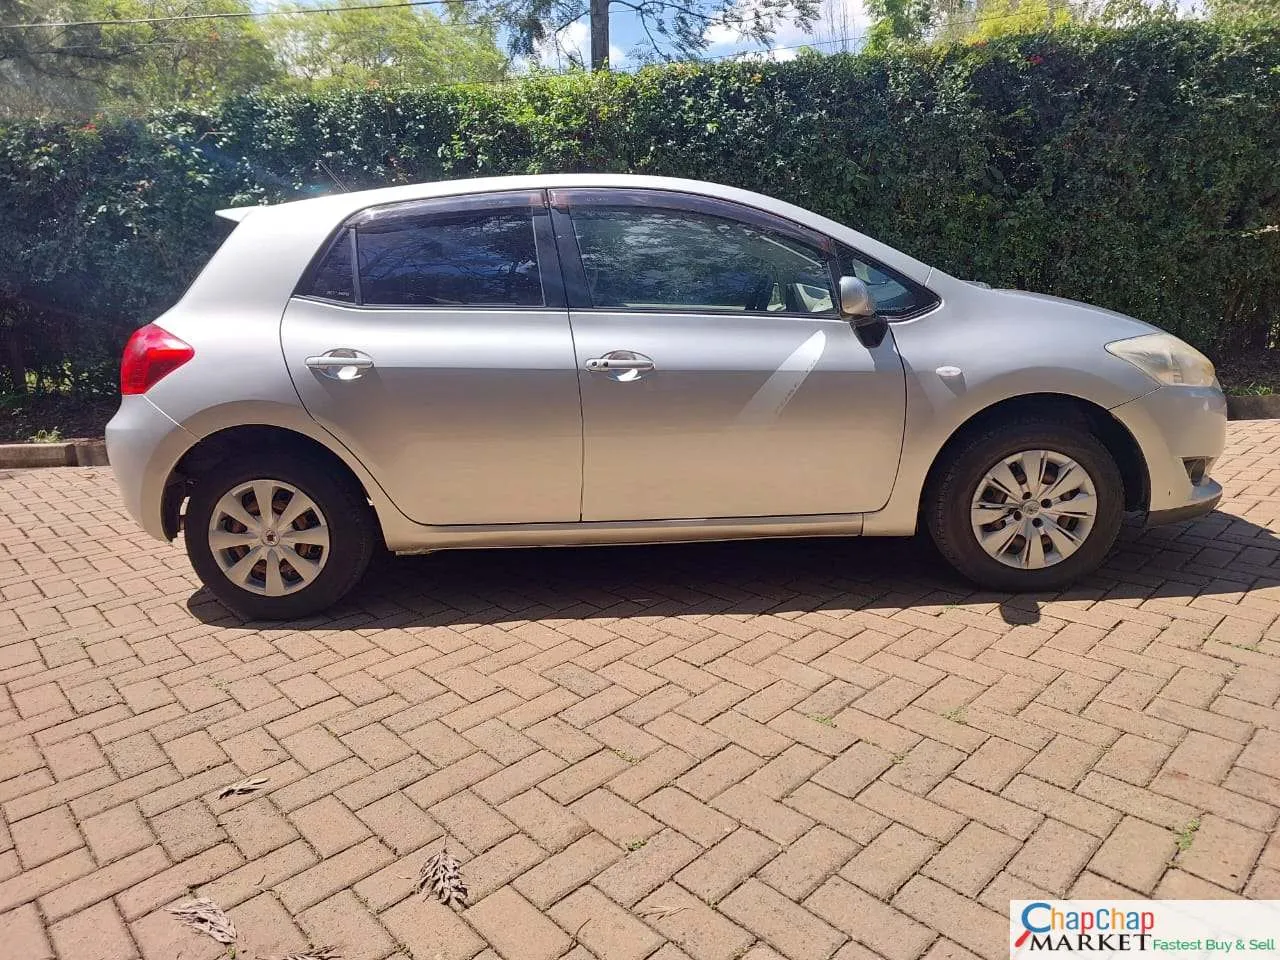 Cars Cars For Sale/Vehicles-Toyota AURIS QUICK SALE You Pay 30% Deposit Trade in OK as NEW